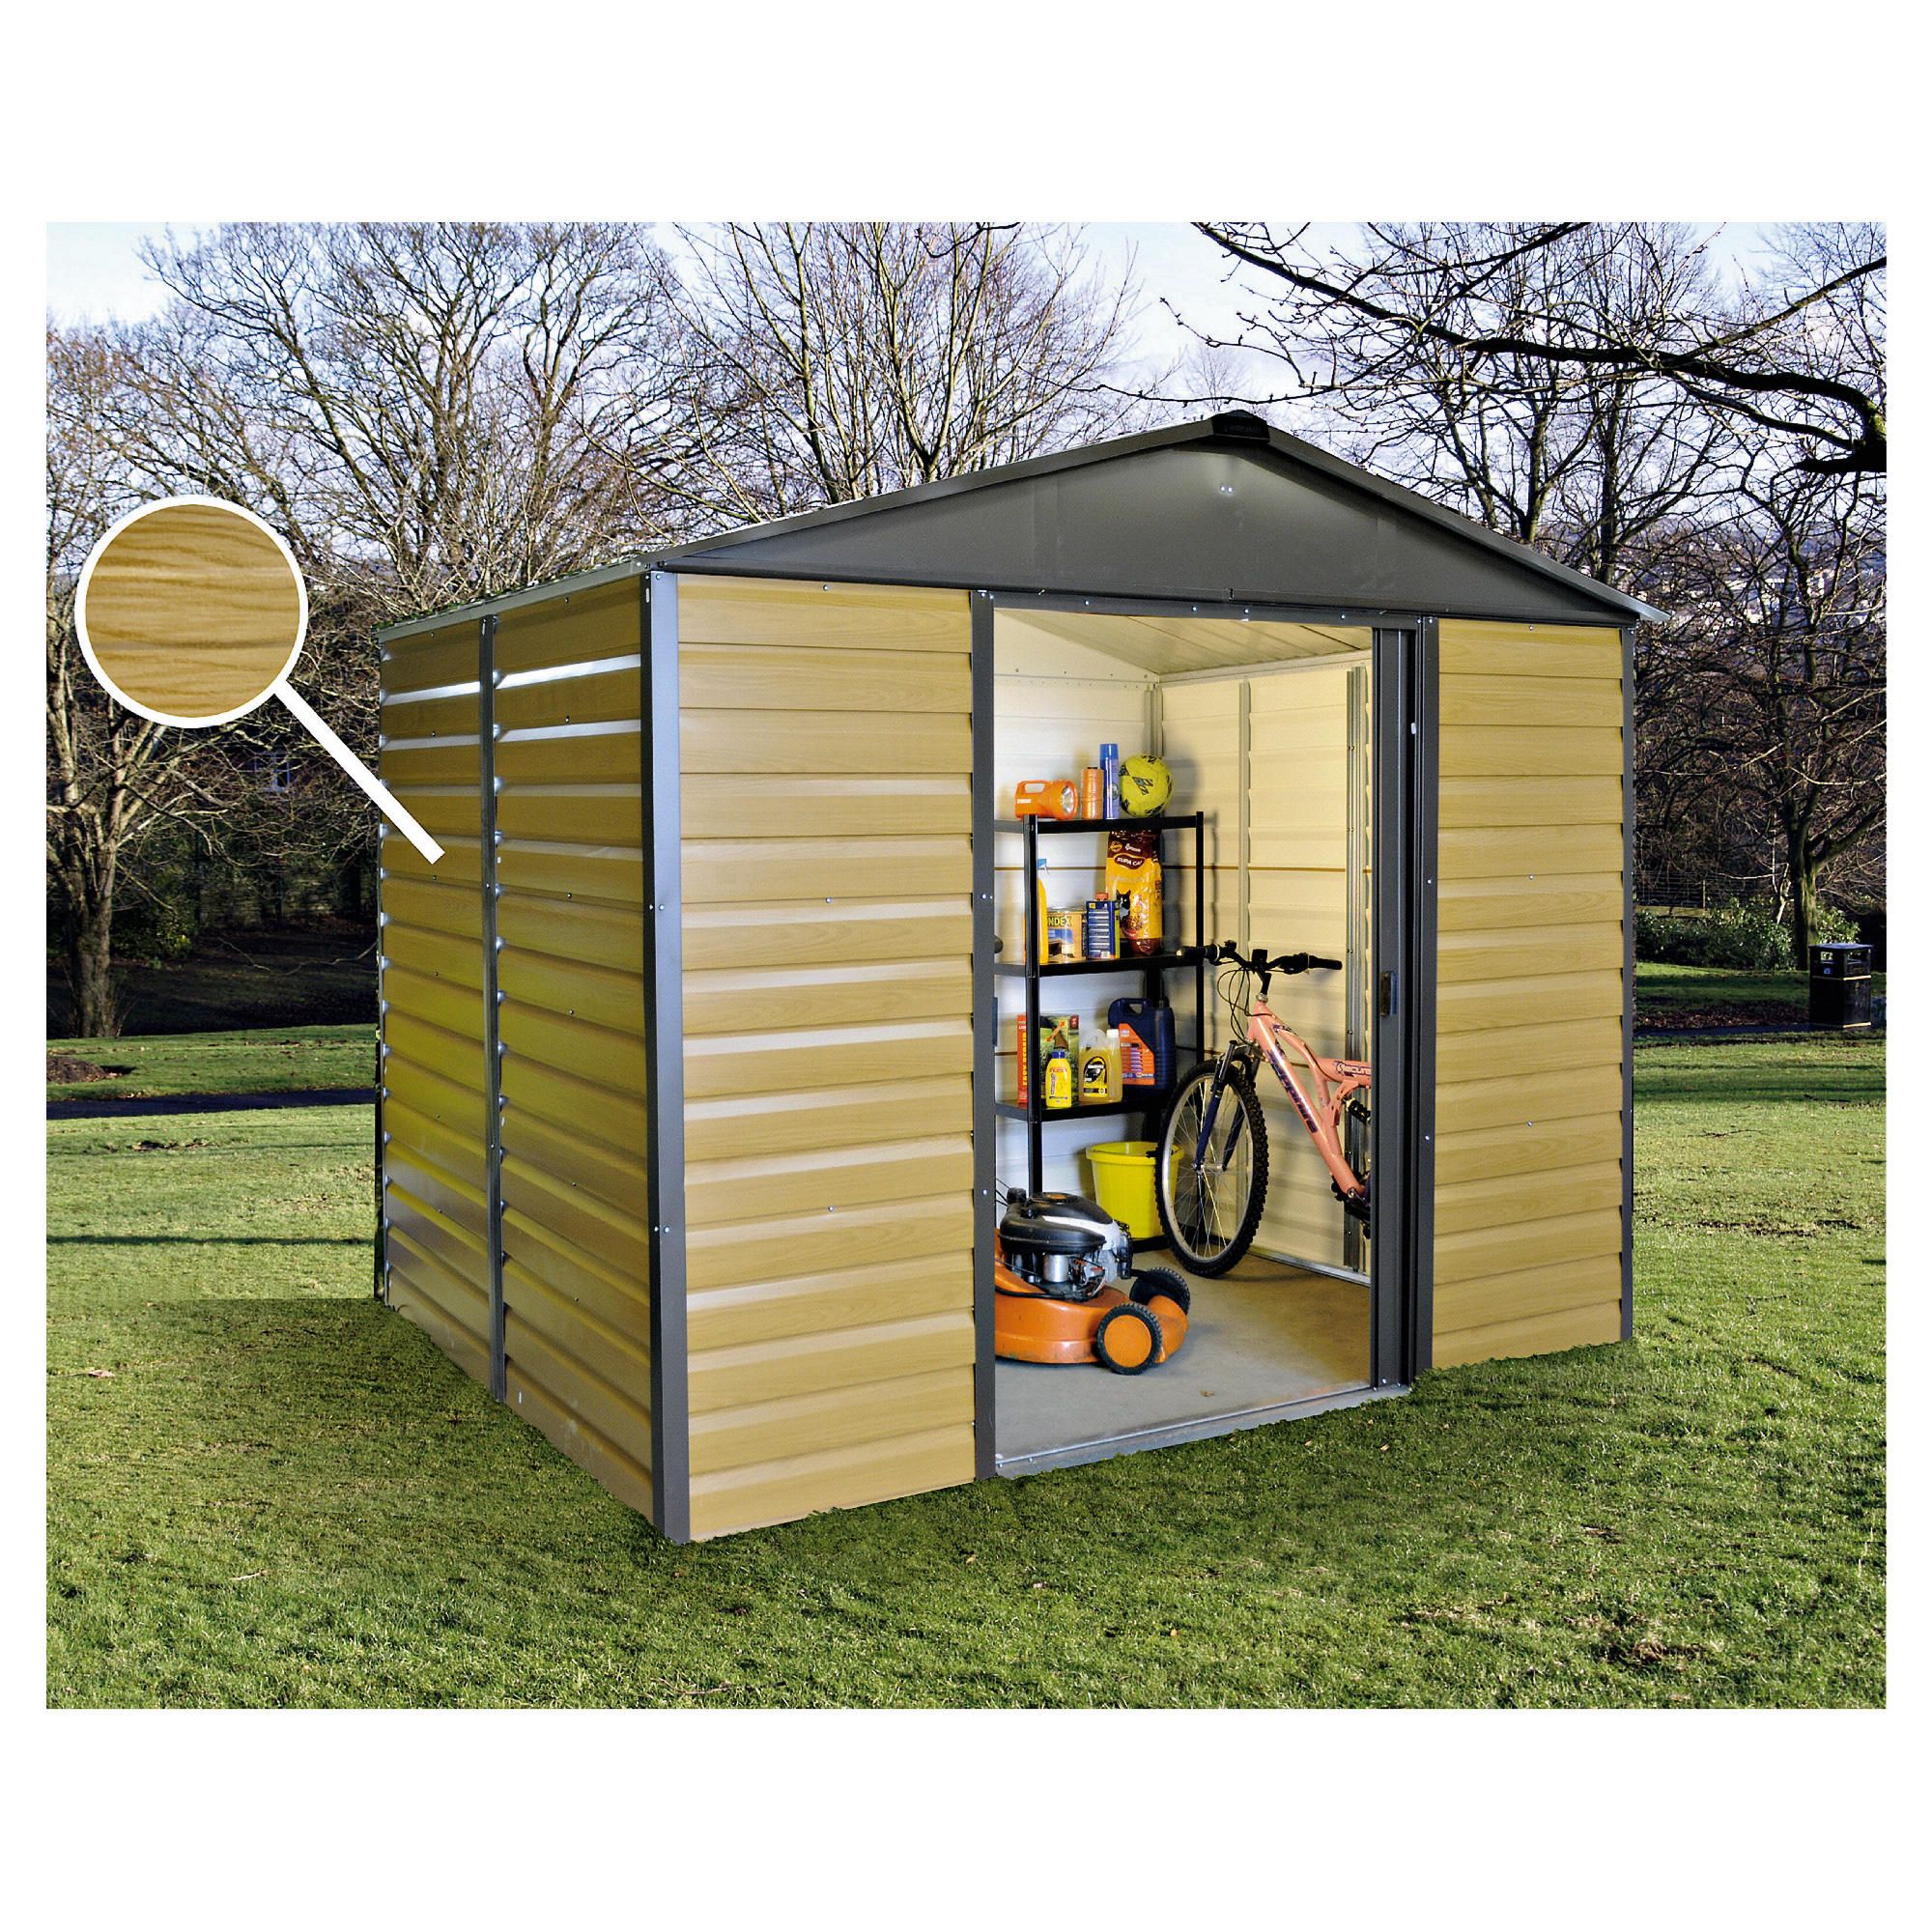  shed this yardmaster 6x6ft apex shed provides secure storage space for